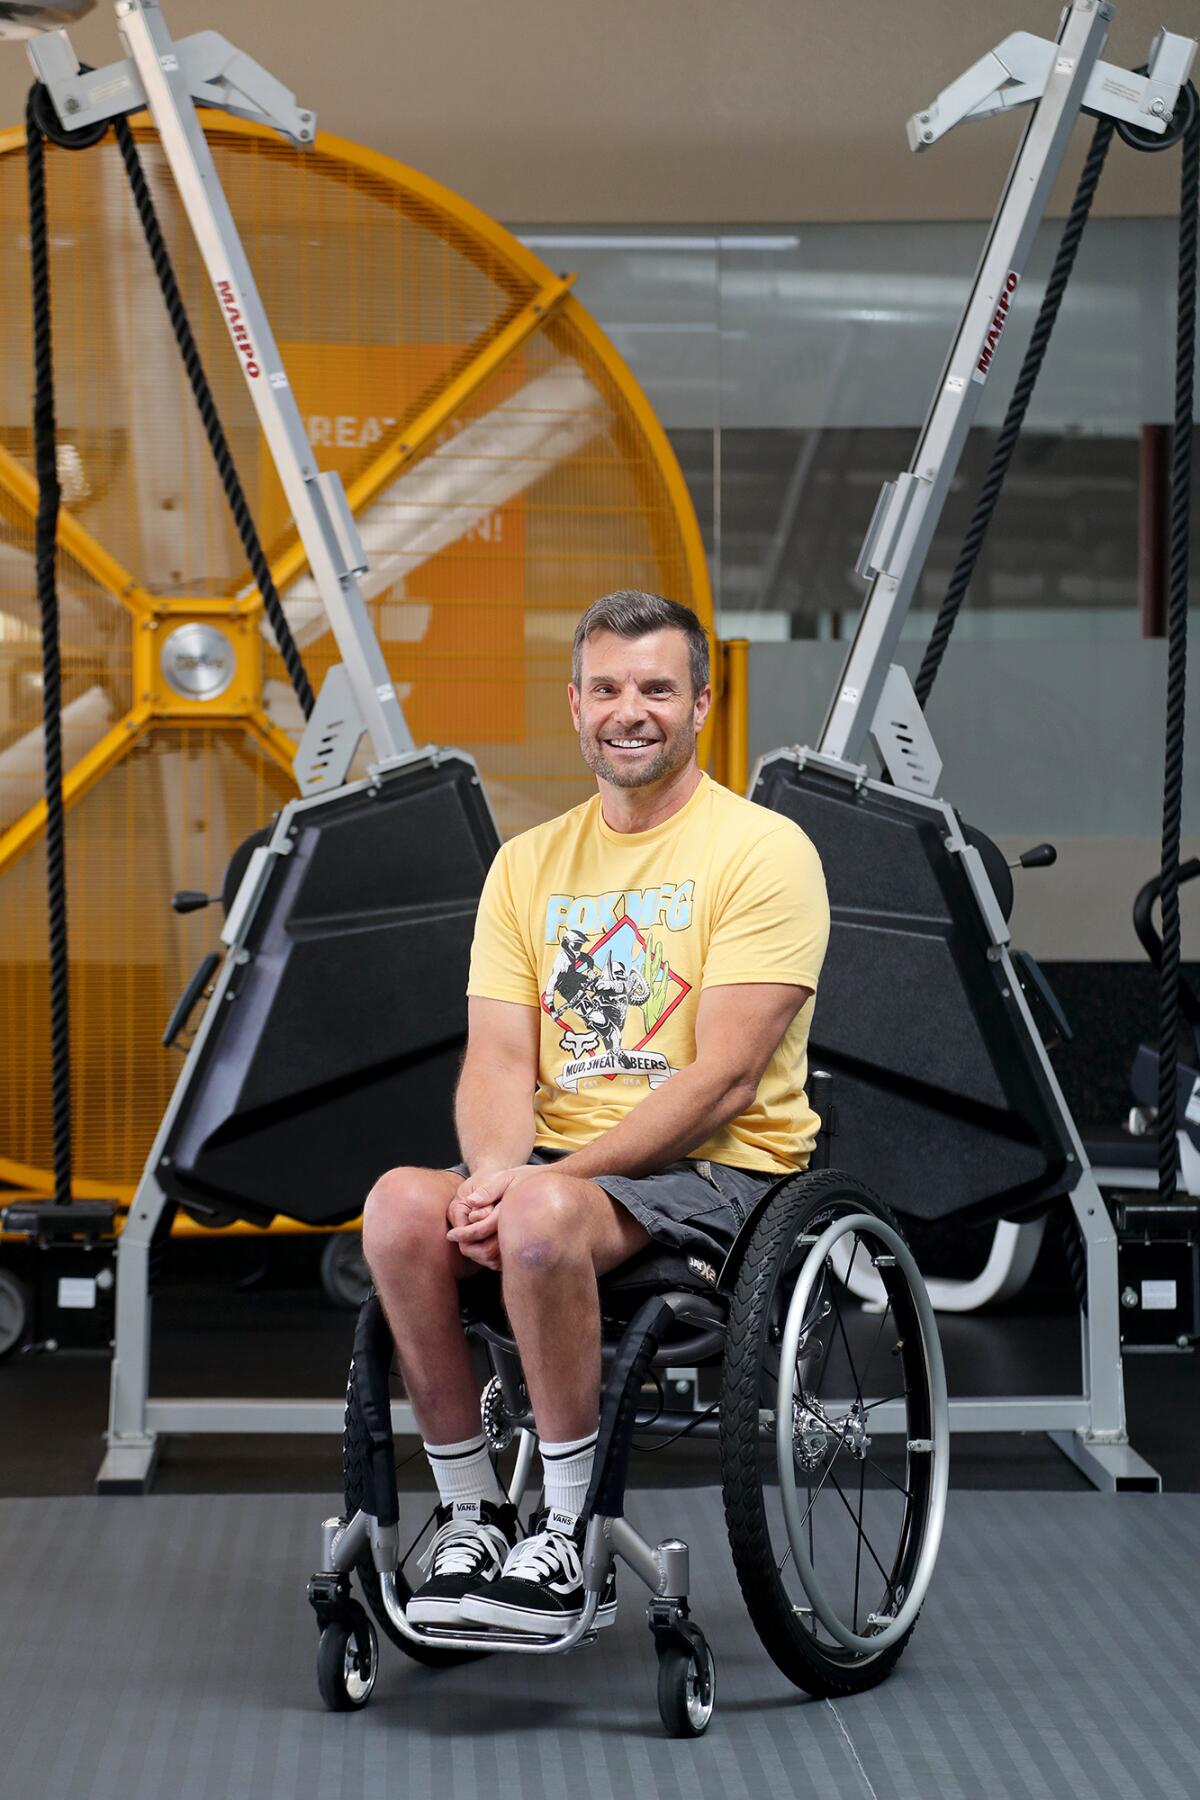 Paul Ferguson, a t12 paraplegic who has been wheelchair-bound for 18 years, said he has transformed his life.